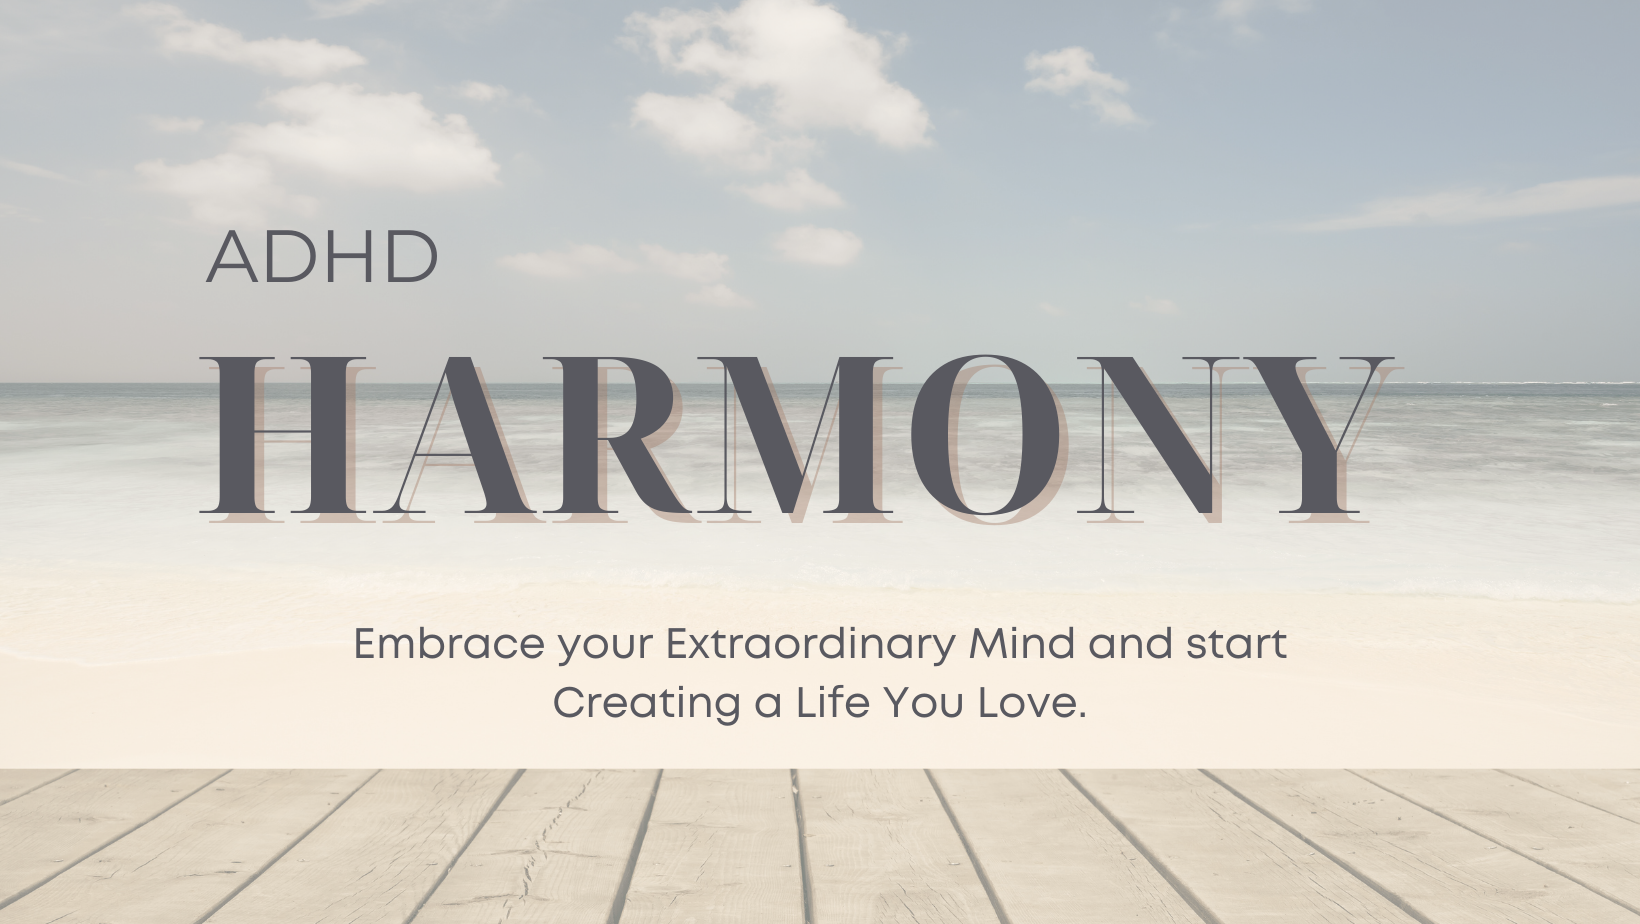 ADHD Harmony Embrace your extraordinary mind and create a life you love